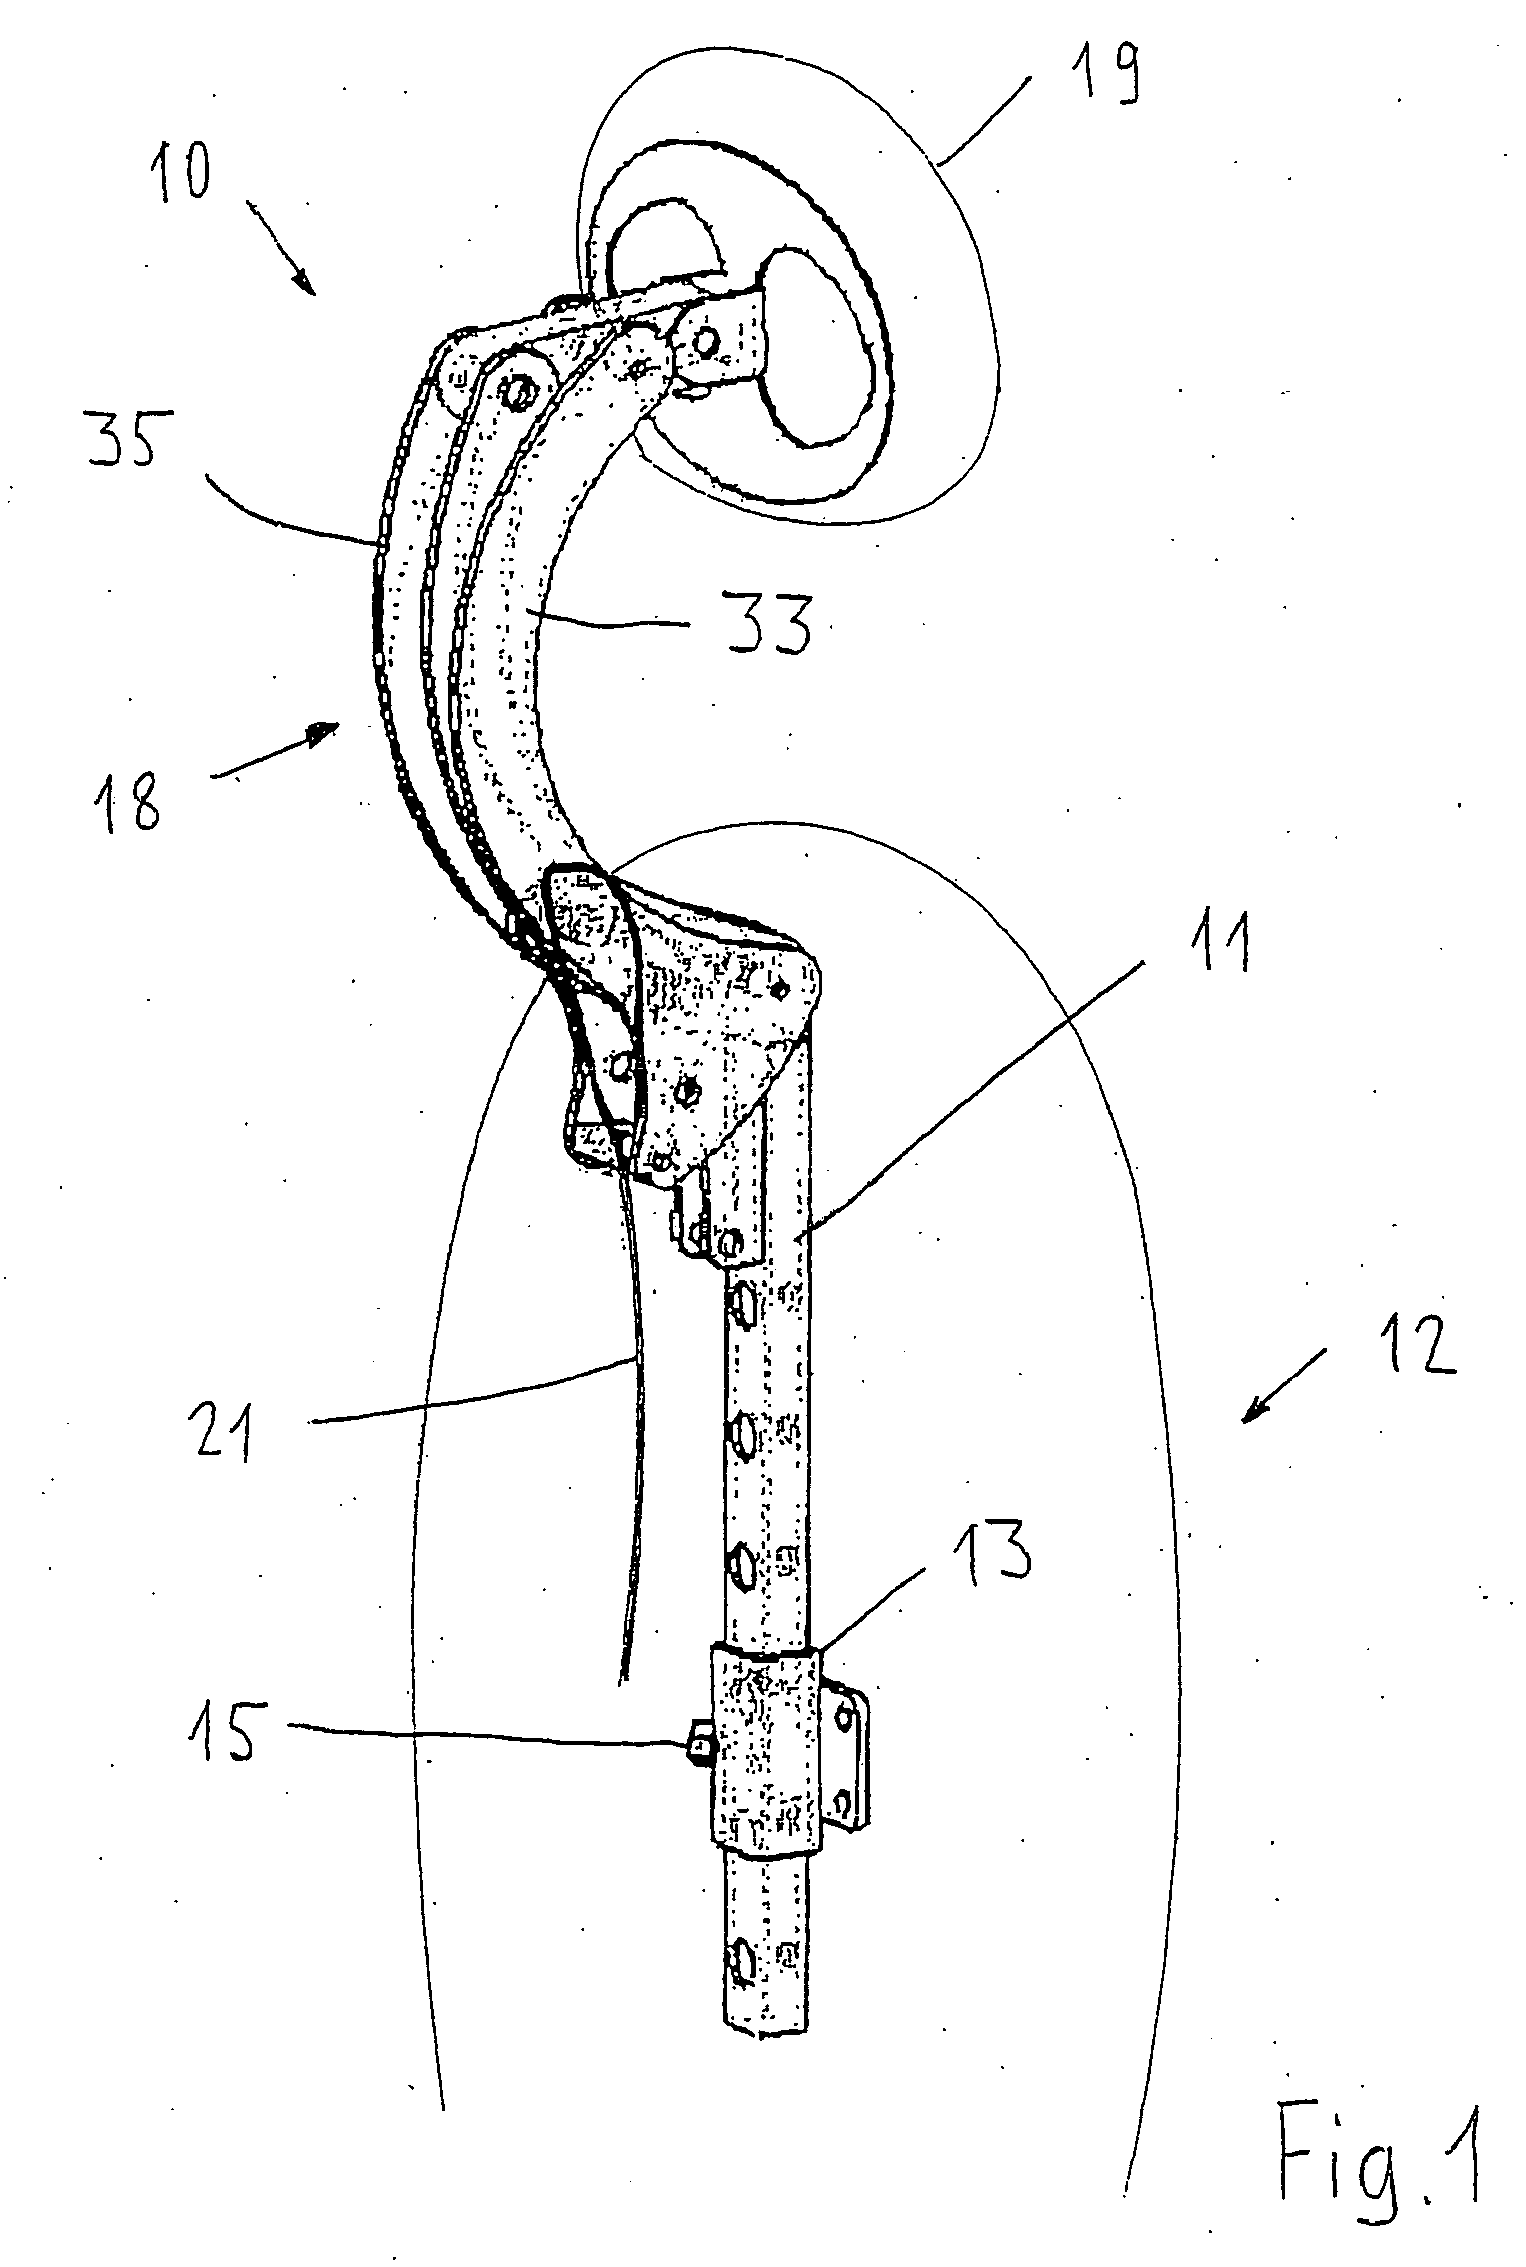 Adjustable head support for a chair